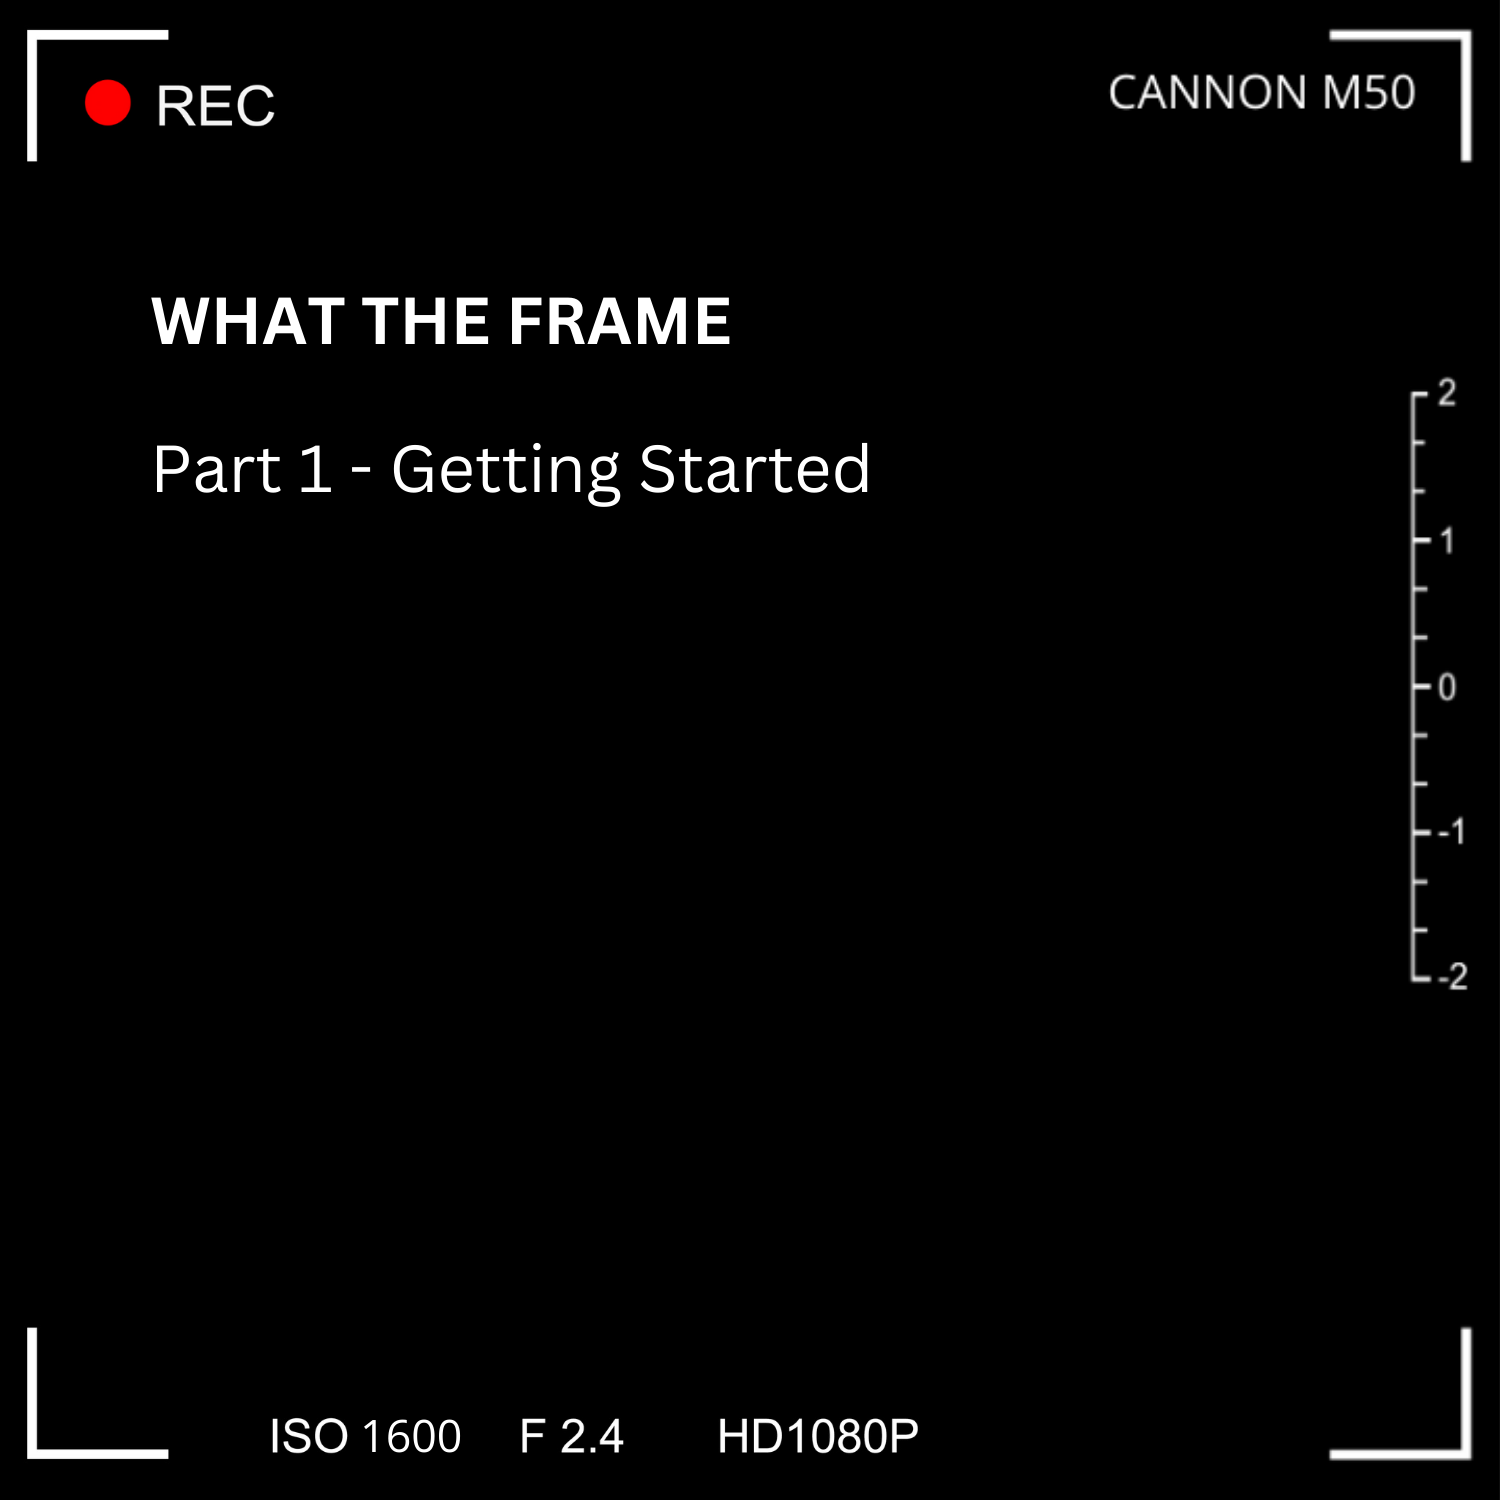 What the Frame | Part 1 - Getting Started